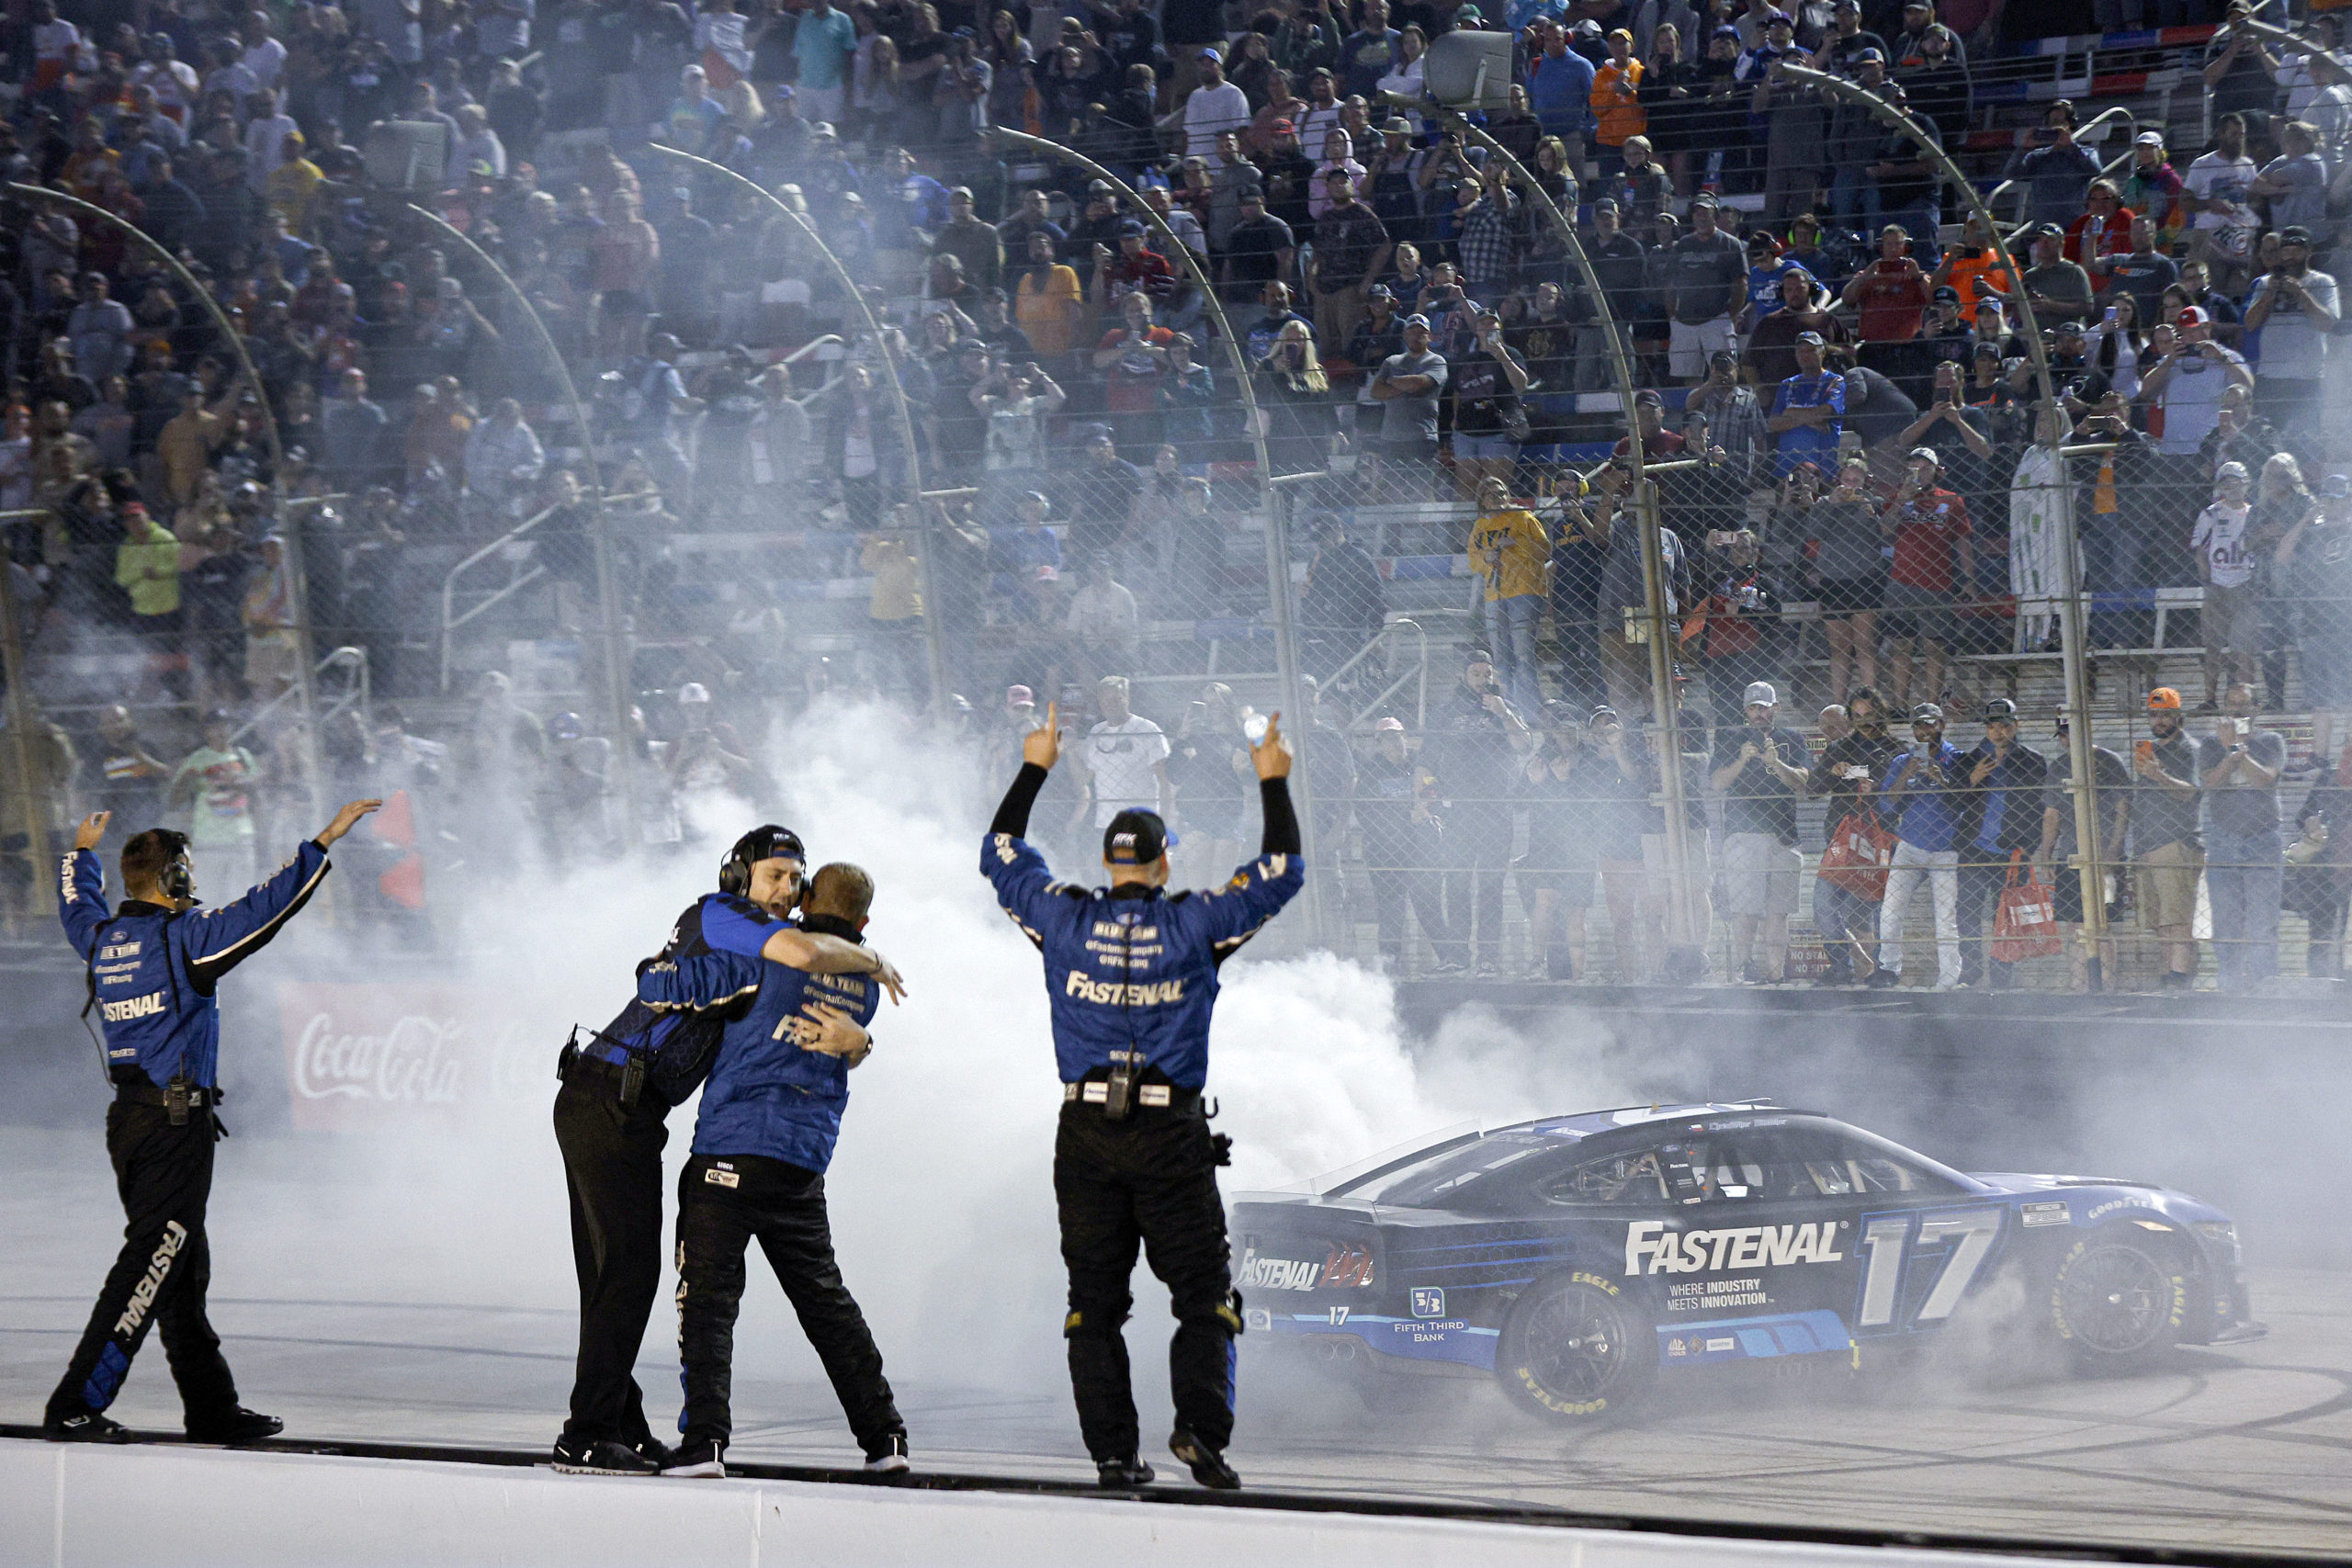 It’s Buescher, Baby! Buescher Claims Iconic Victory as RFK Dominates Bristol Night Race